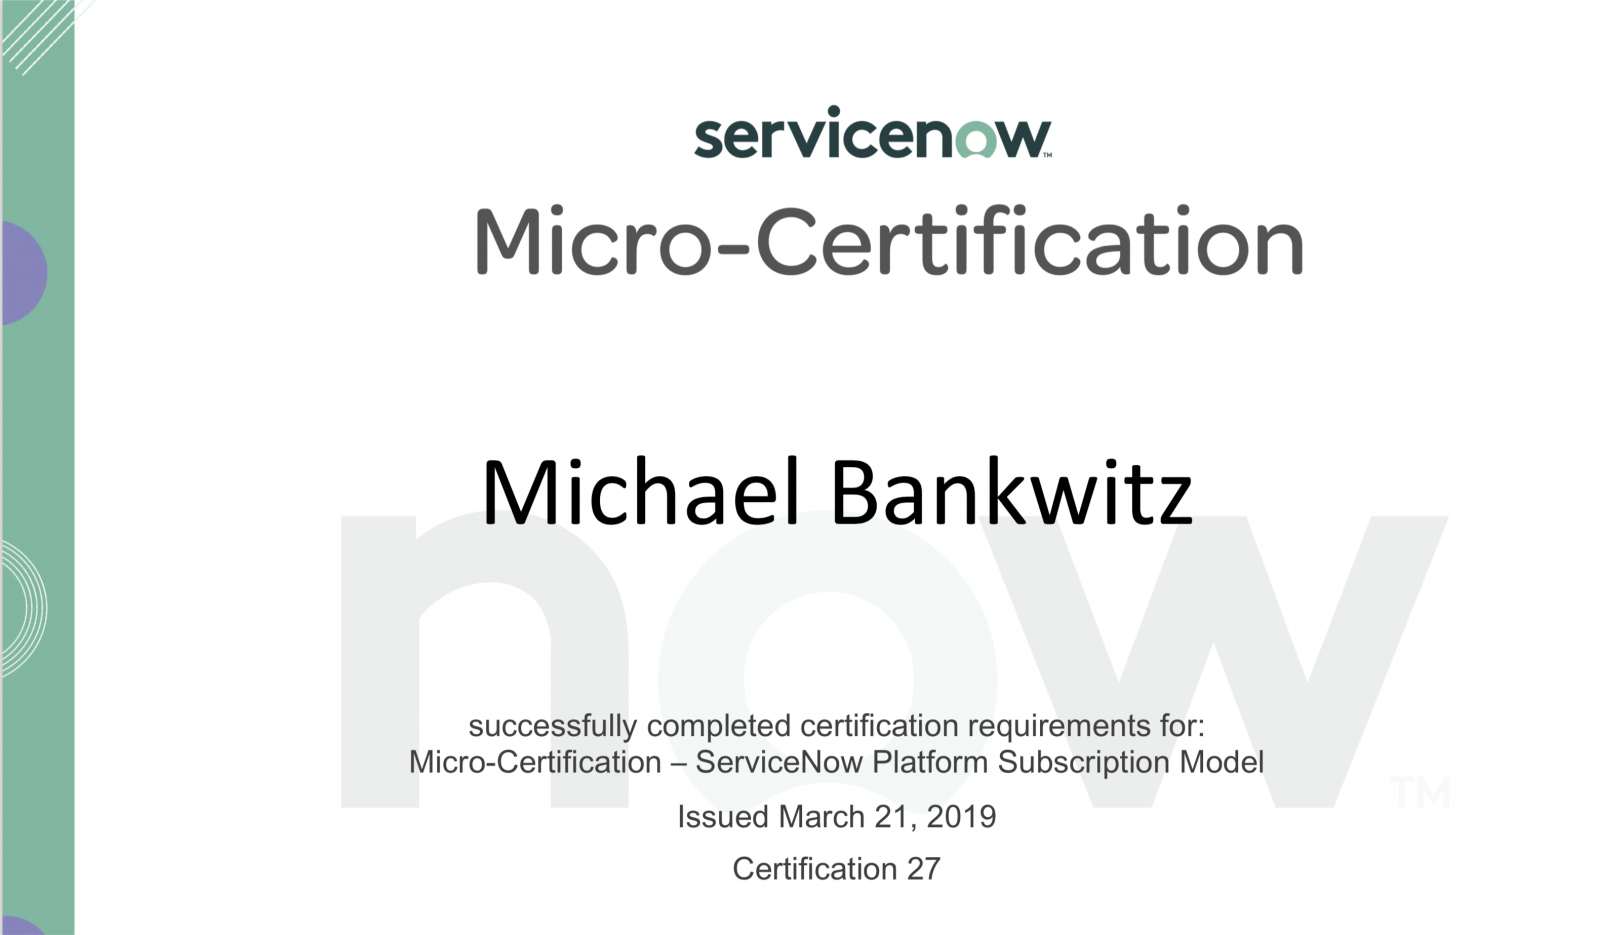 New license model from ServiceNow Michael Bankwitz